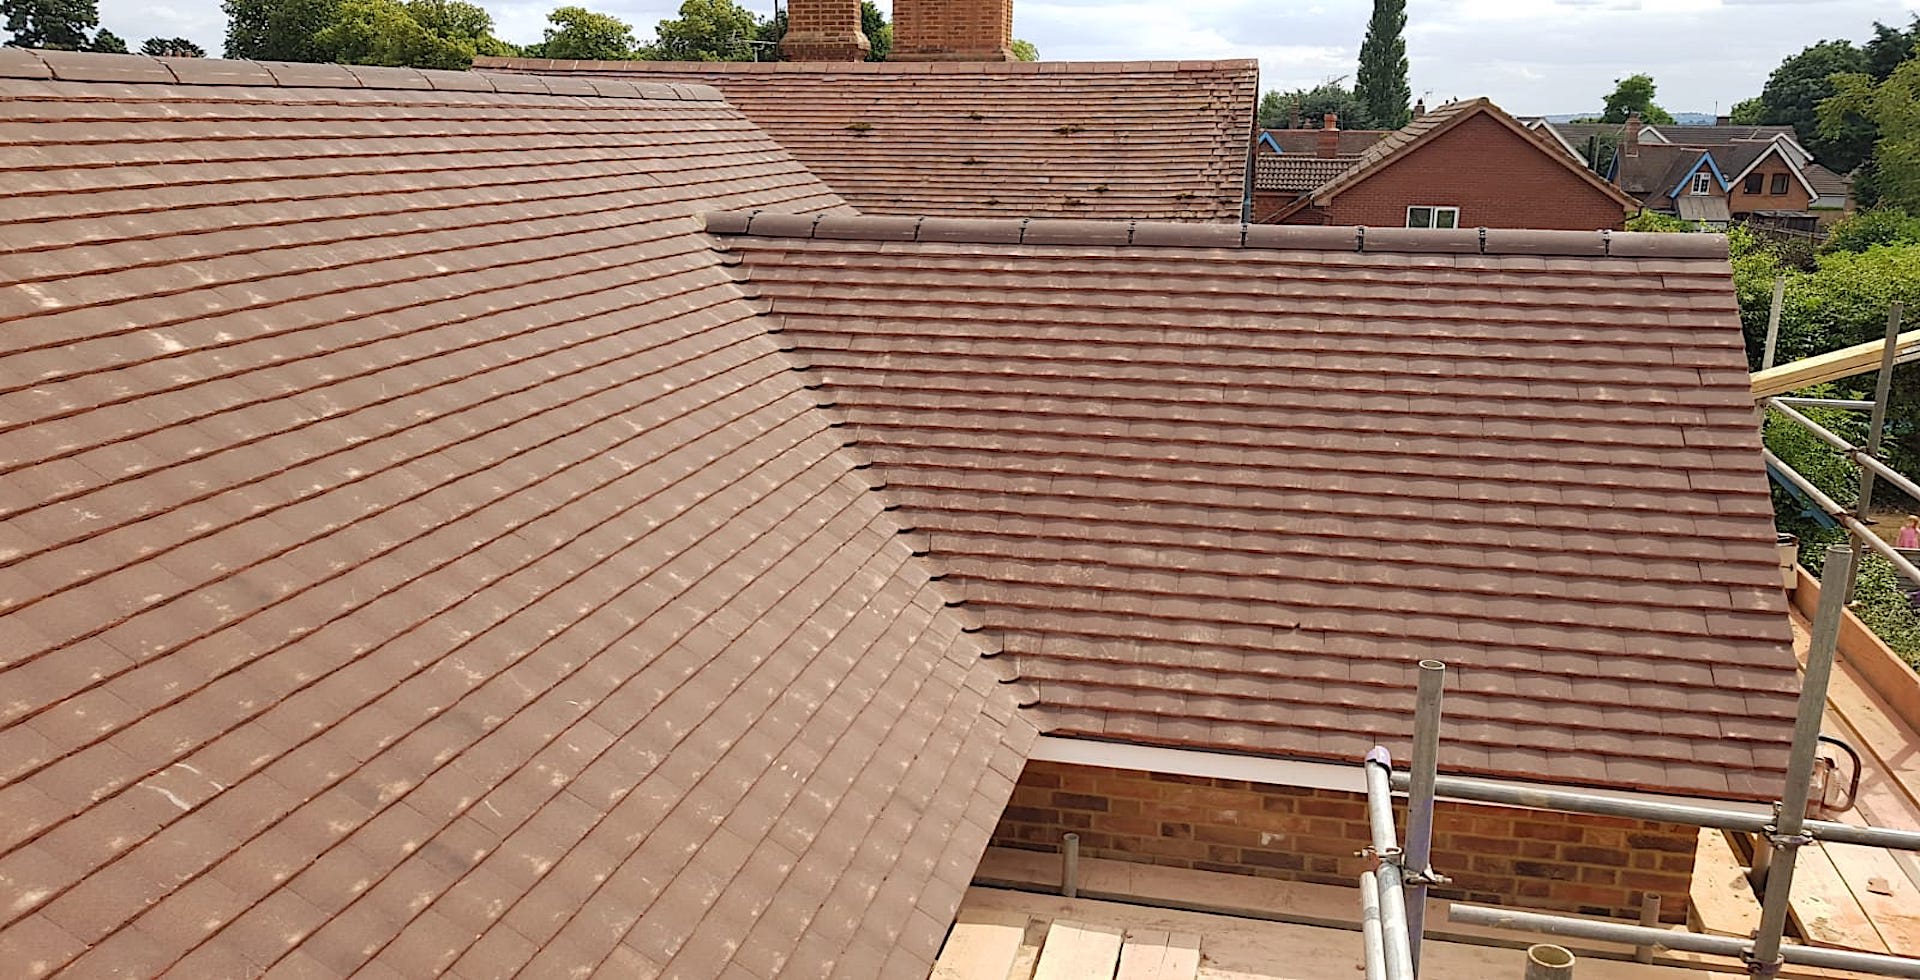 Images M Foster Roofing